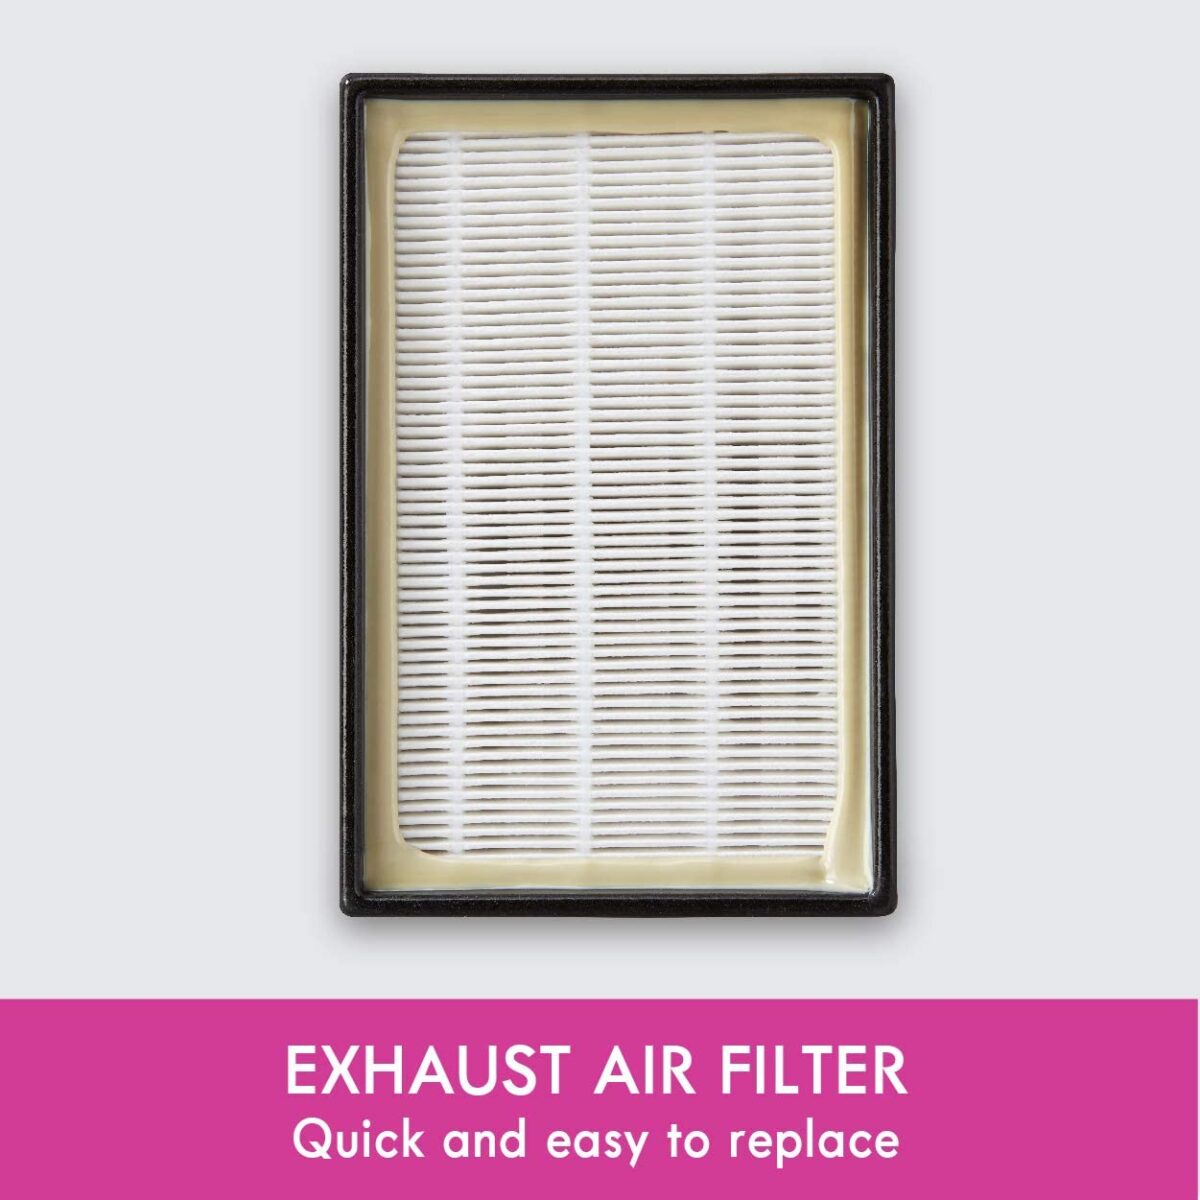 Kenmore 53295 EF-1 HEPA Air Filter for Upright and Canister Vacuums,